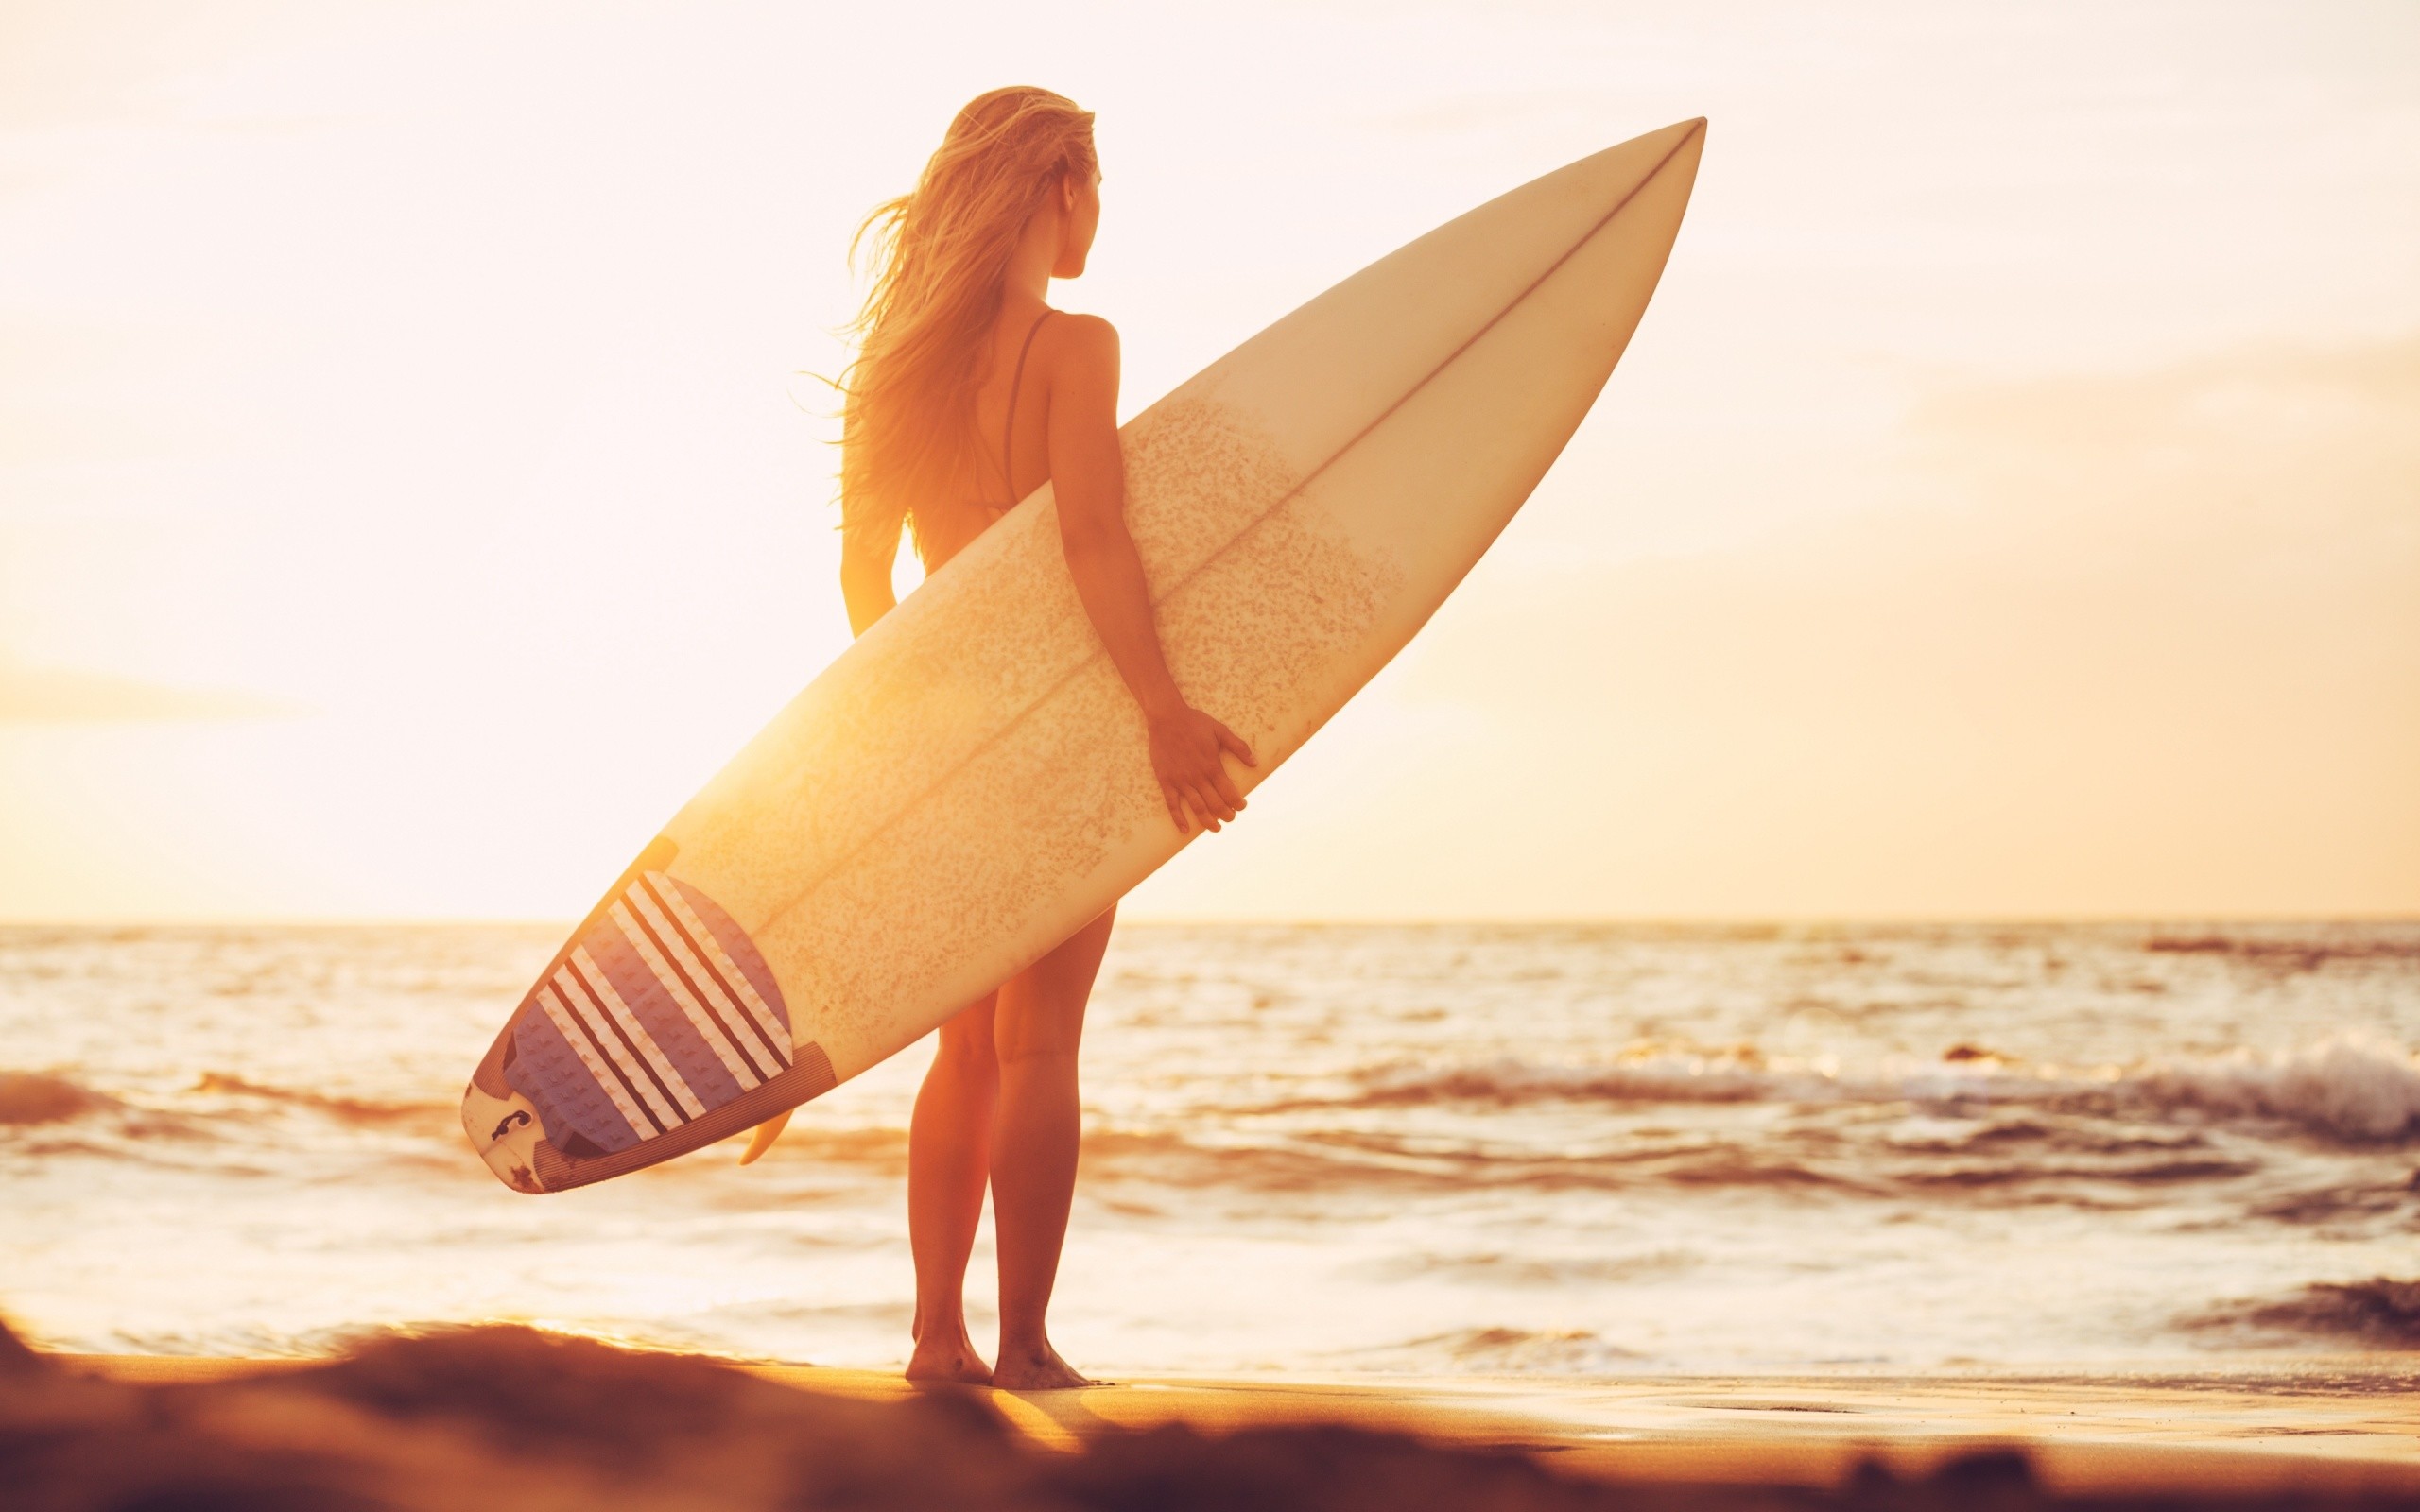 Surfboard Photos Download The BEST Free Surfboard Stock Photos  HD Images